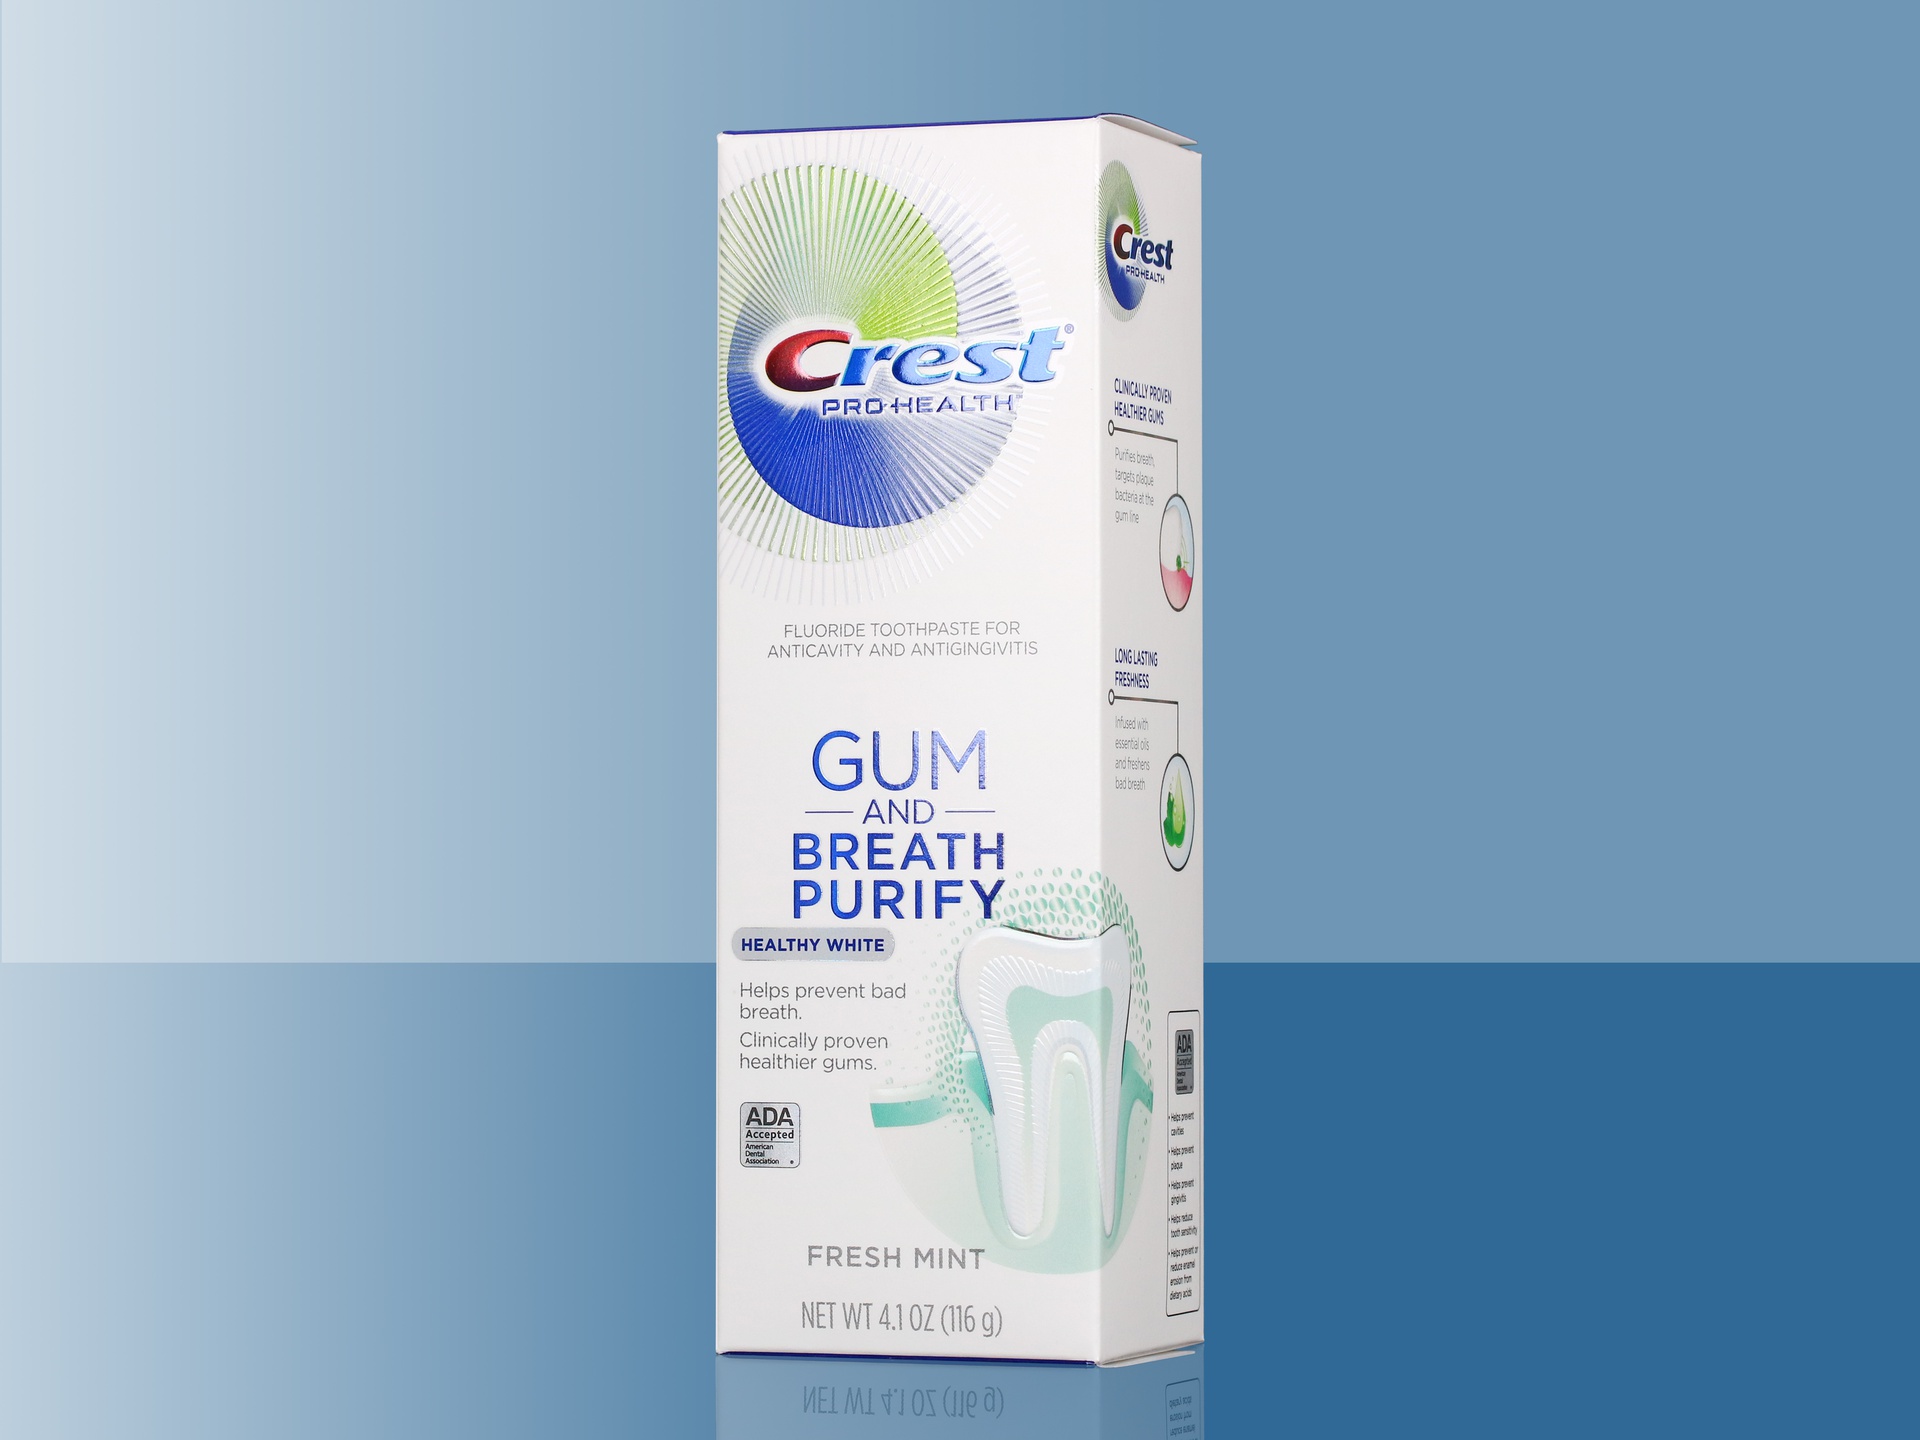 Crest Gum and Breath Purify Healthy White packaging